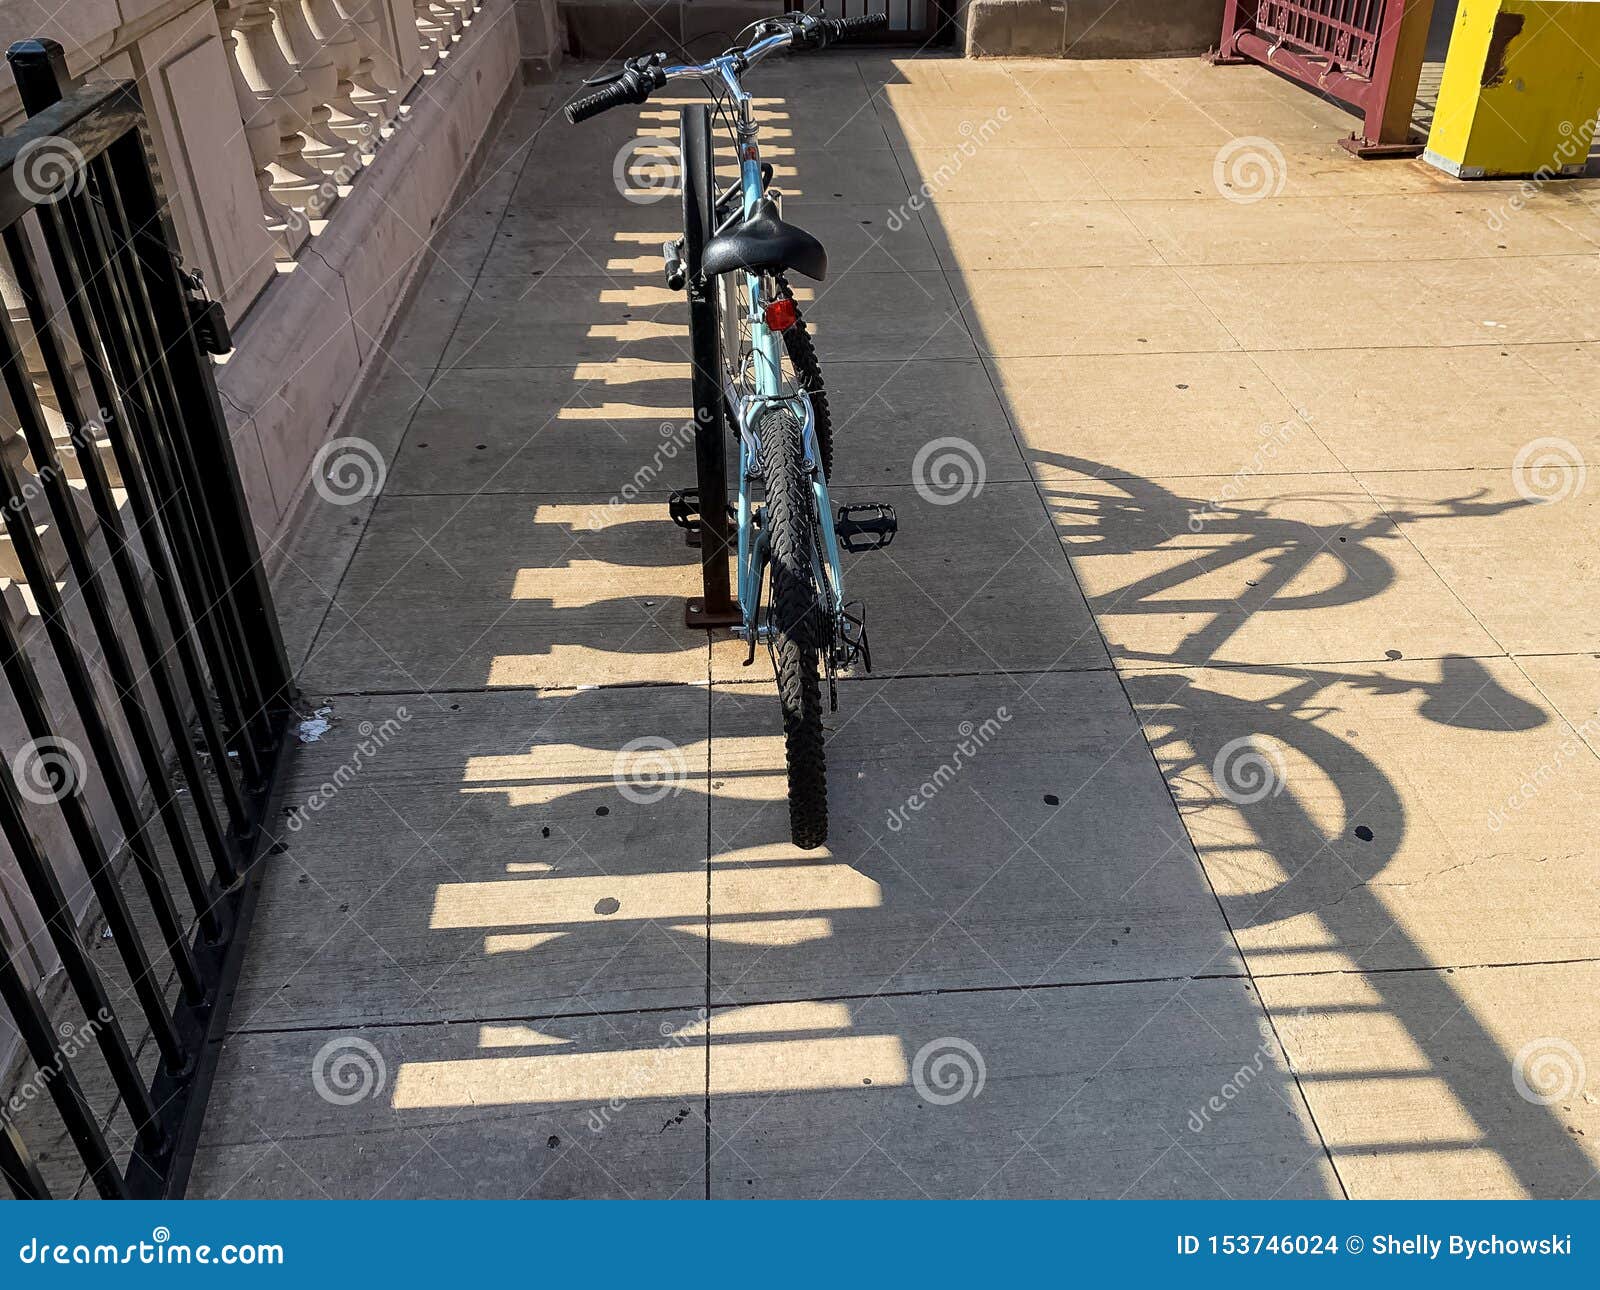 bicycle and its shadow on lasalle bridge in chicago loop during evening commute